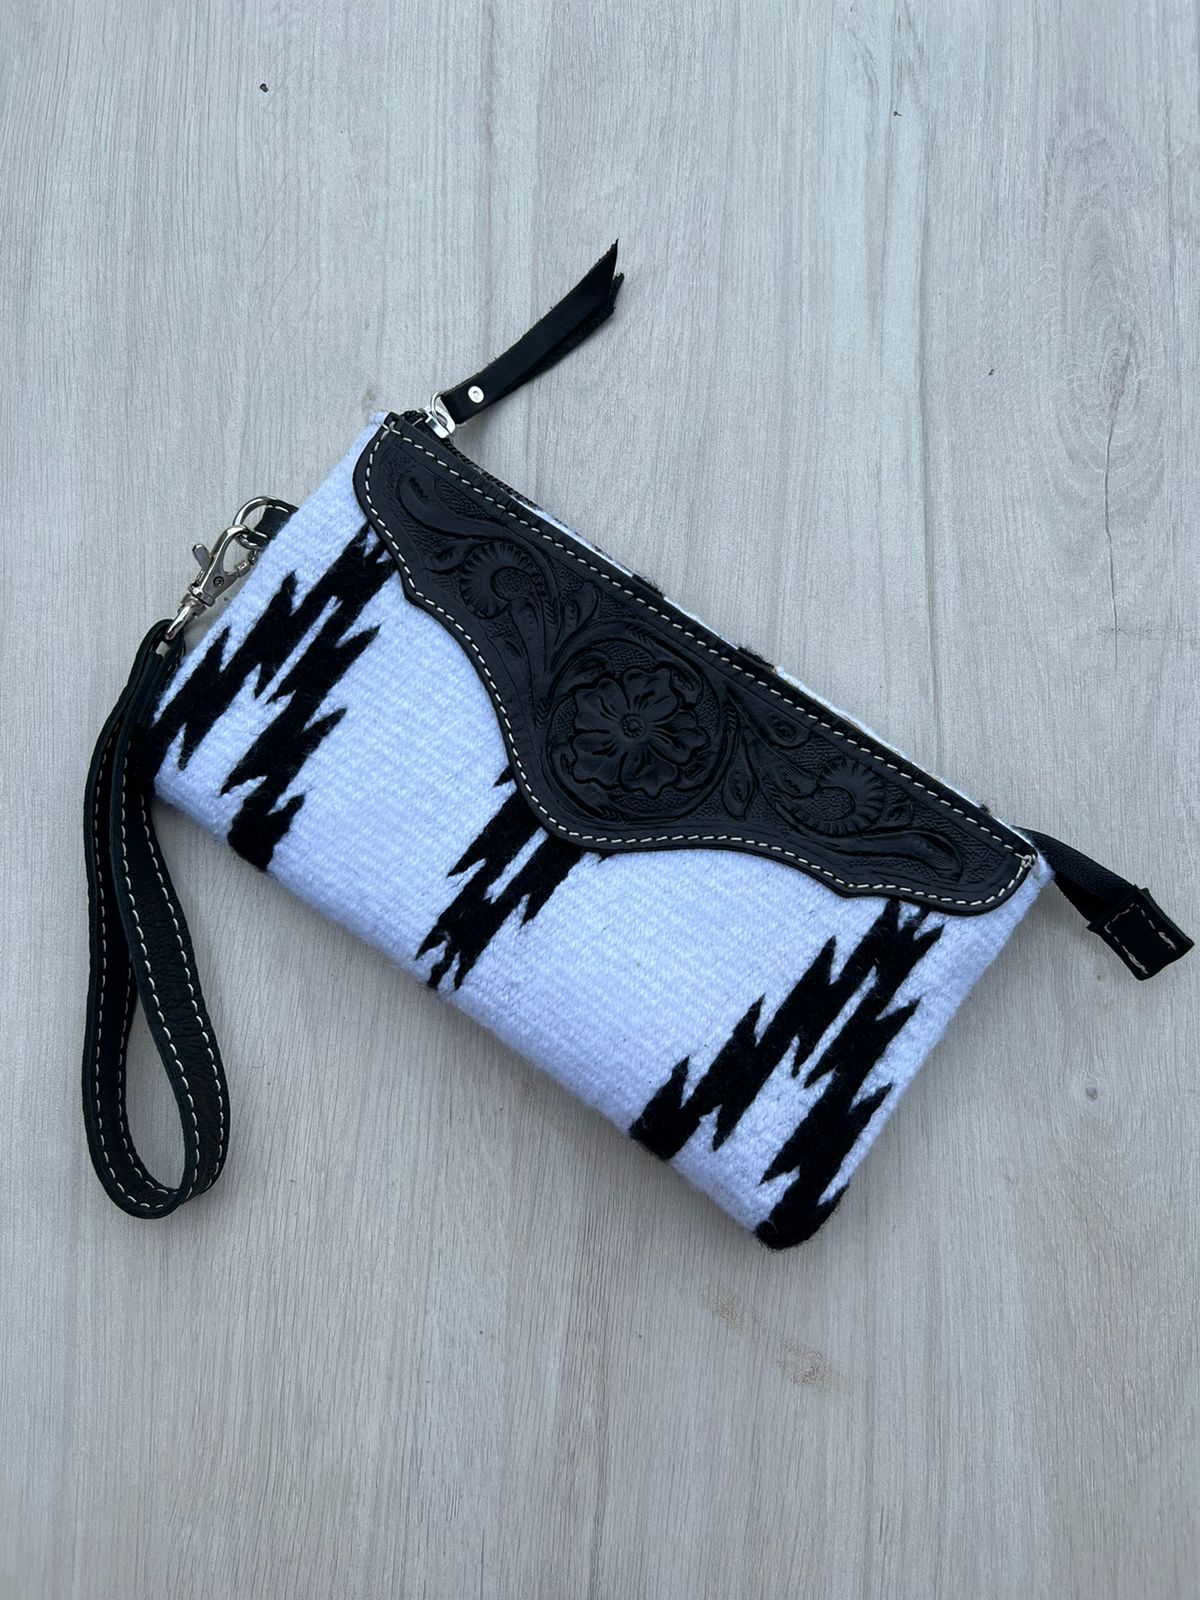 A8211 - B&W Saddle Blanket Clutch with Tooled Leather